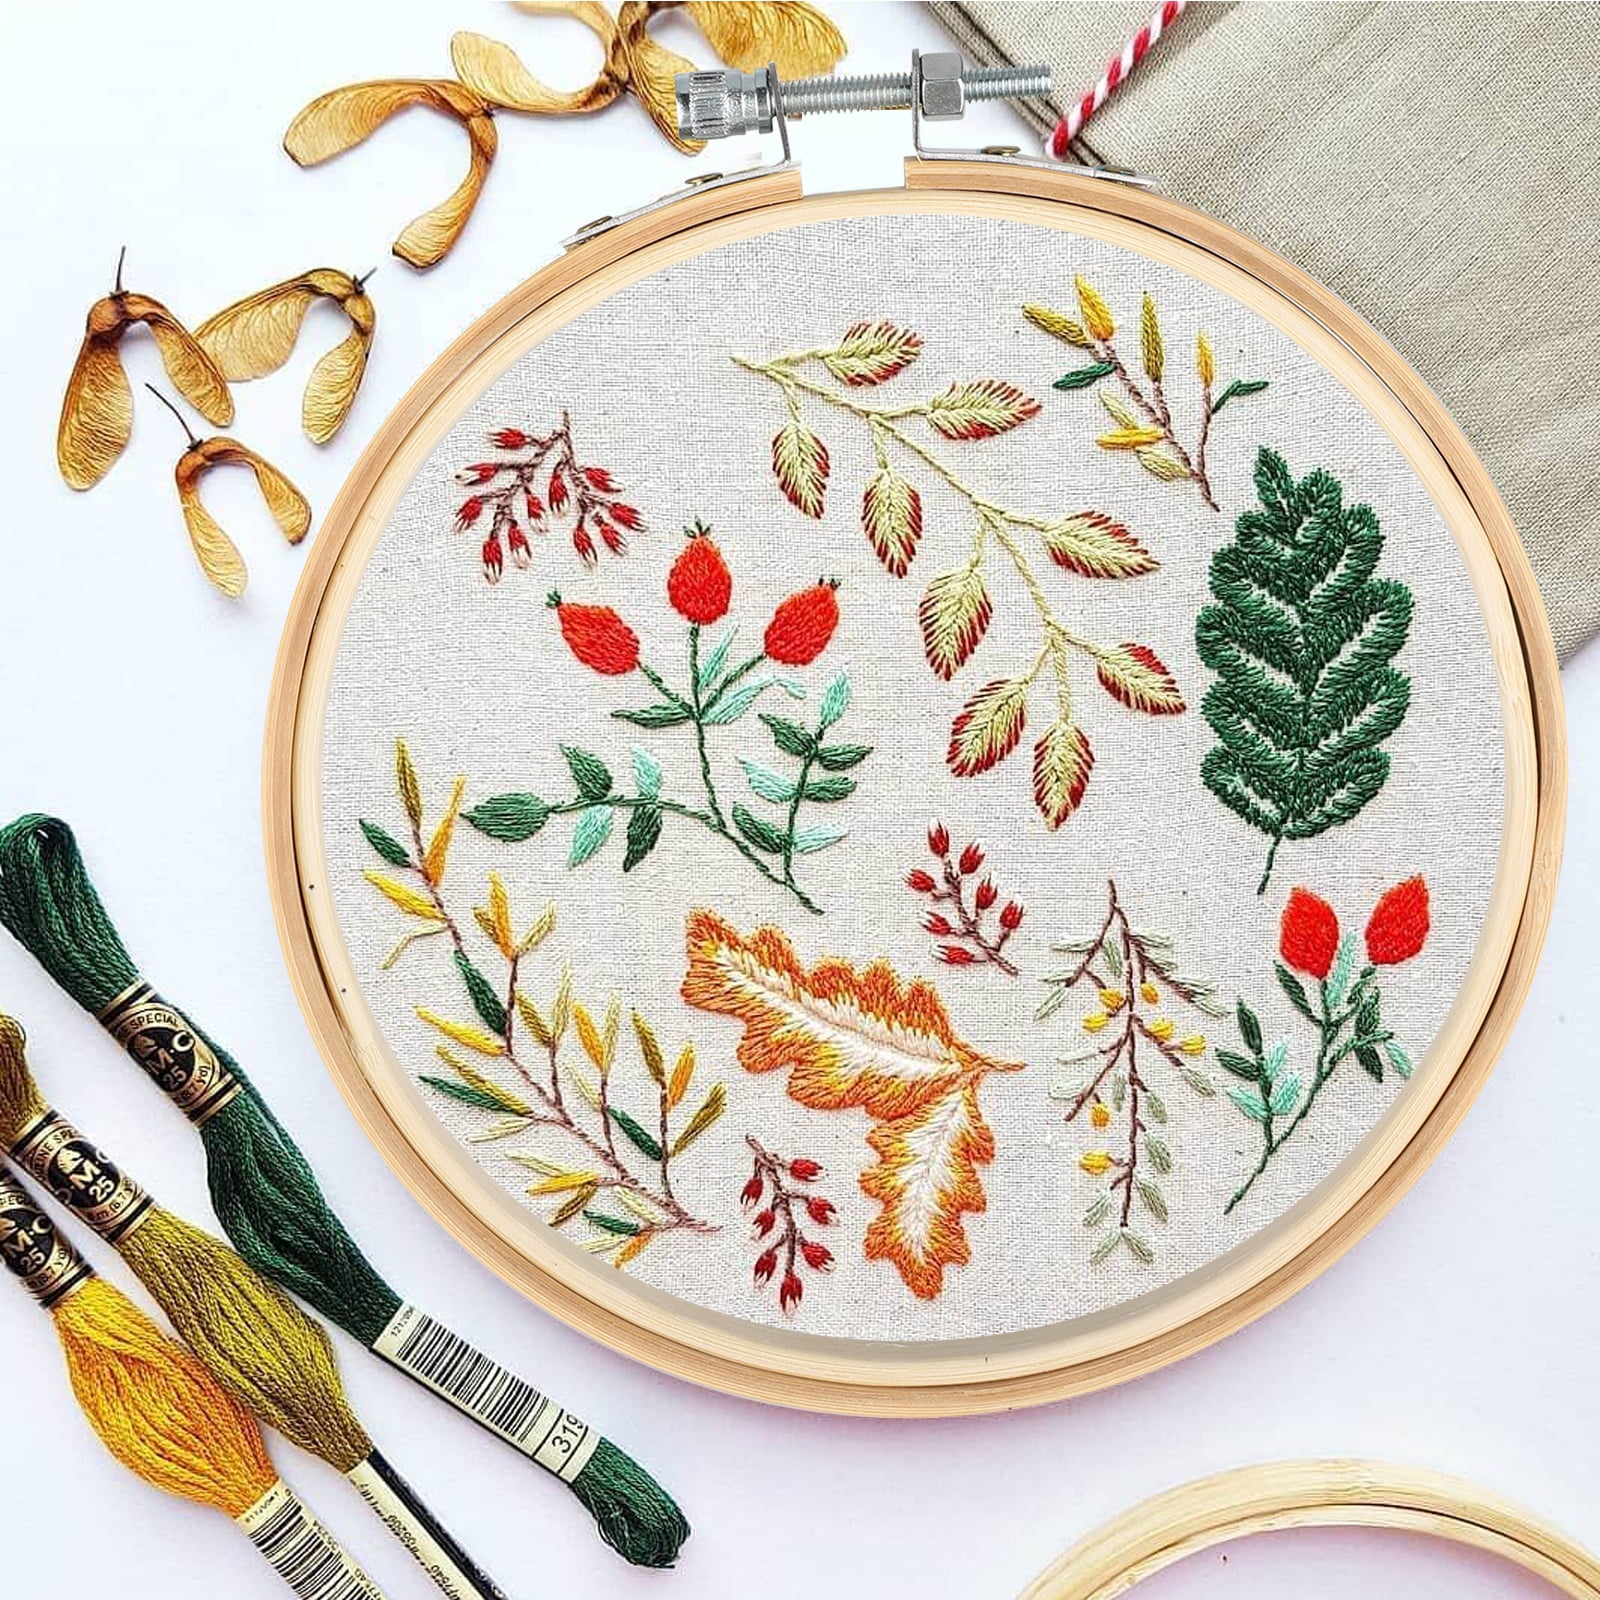 10Pcs 0.98 Inch Embroidery Hoops Bamboo Circle Cross Stitch Hoop Ring for  Embroidery and Cross Stitch, Mini Embroidery Hoop Perfect to DIY Christmas  Decoration 